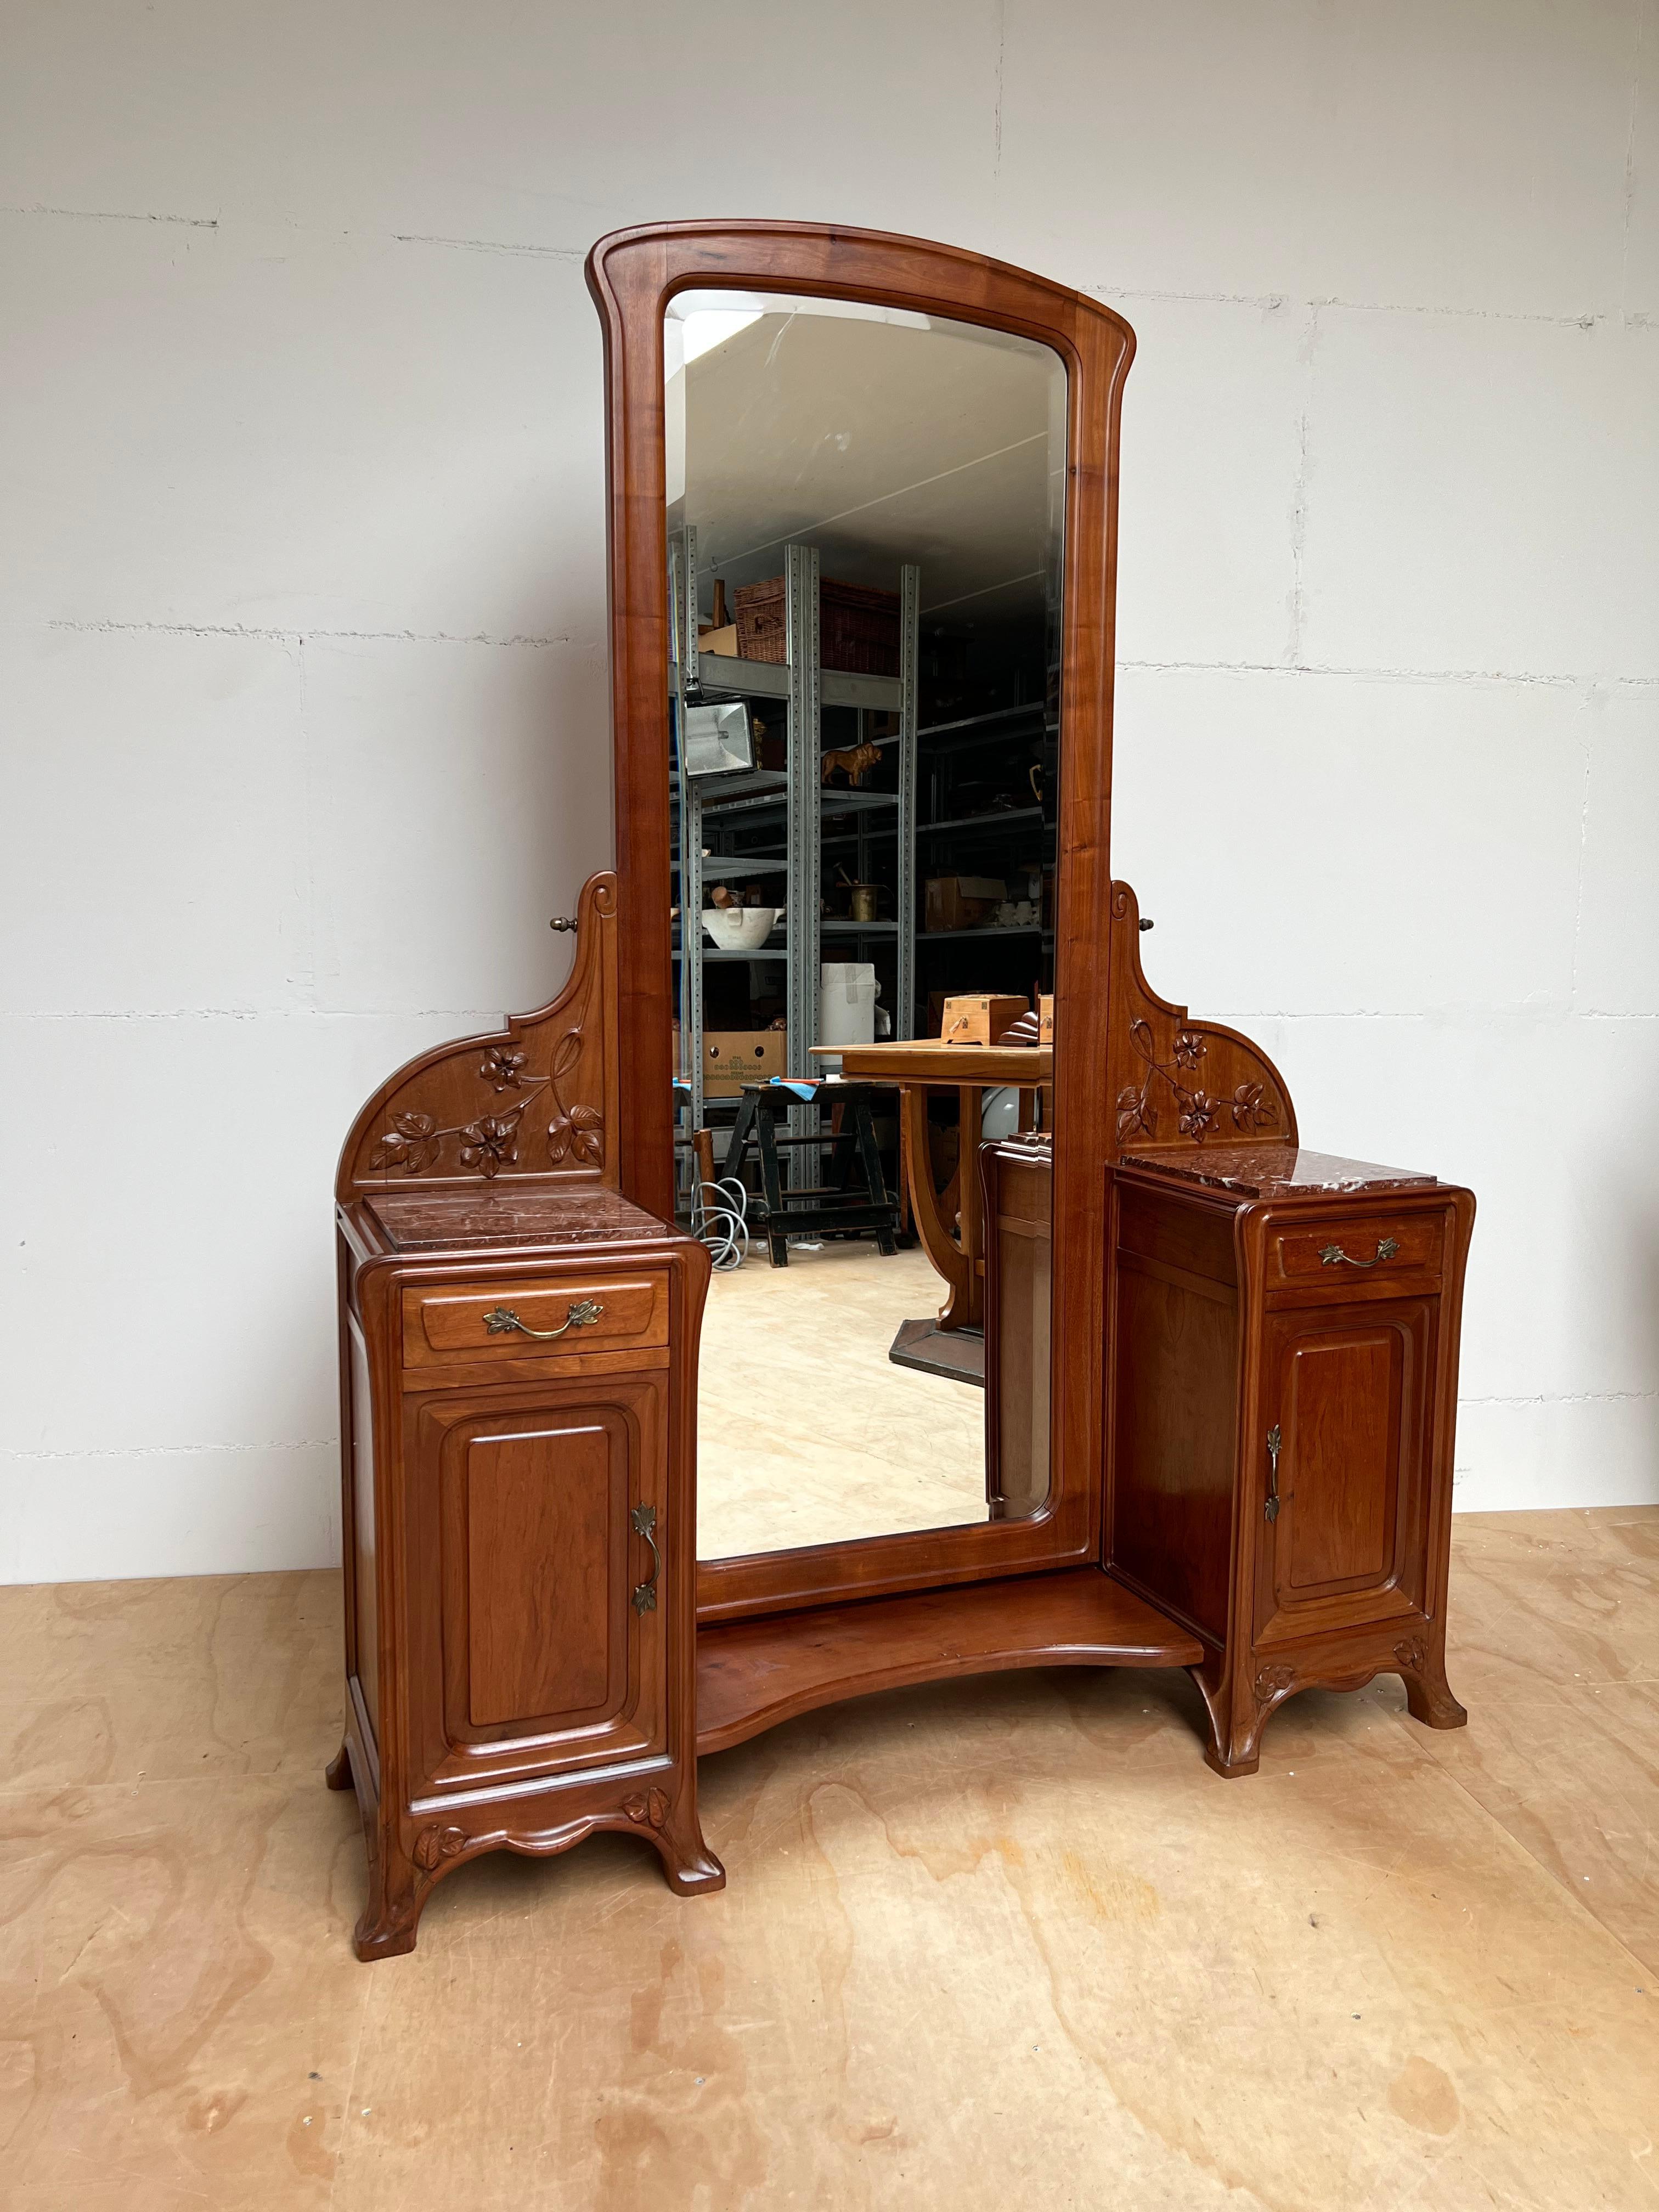 Stunning, practical and all hand-crafted dressing table with full-size beveled mirror.

This museum quality AND condition piece of Art Nouveau furniture is a work of art at the same time. This fine specimen in the Nancy Style dates back to the era